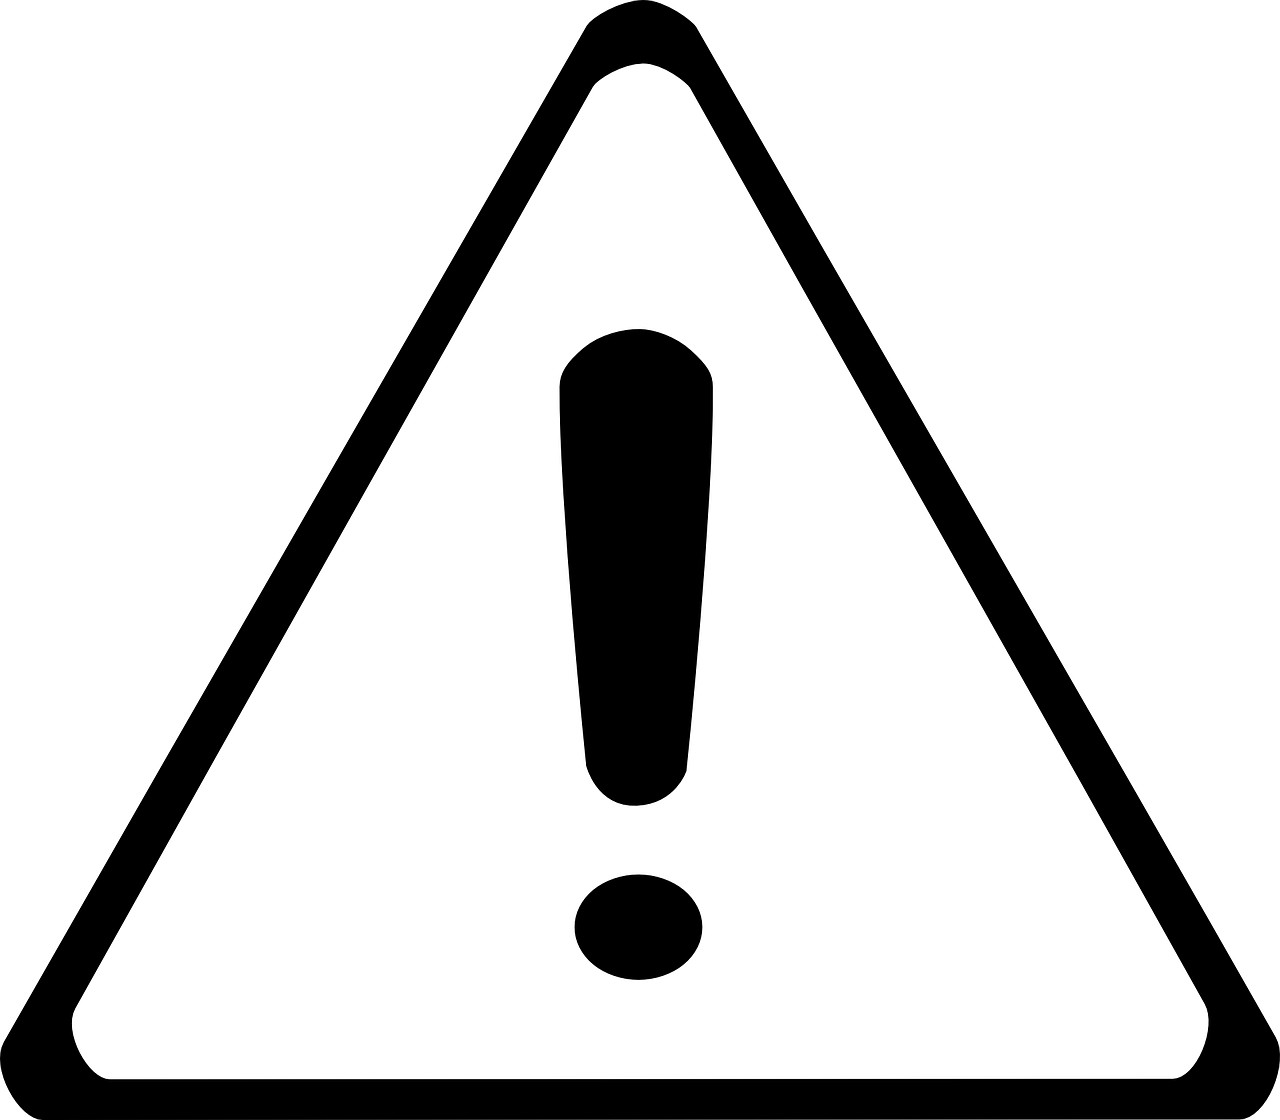 Exclamation Warning Sign Vector PNG image